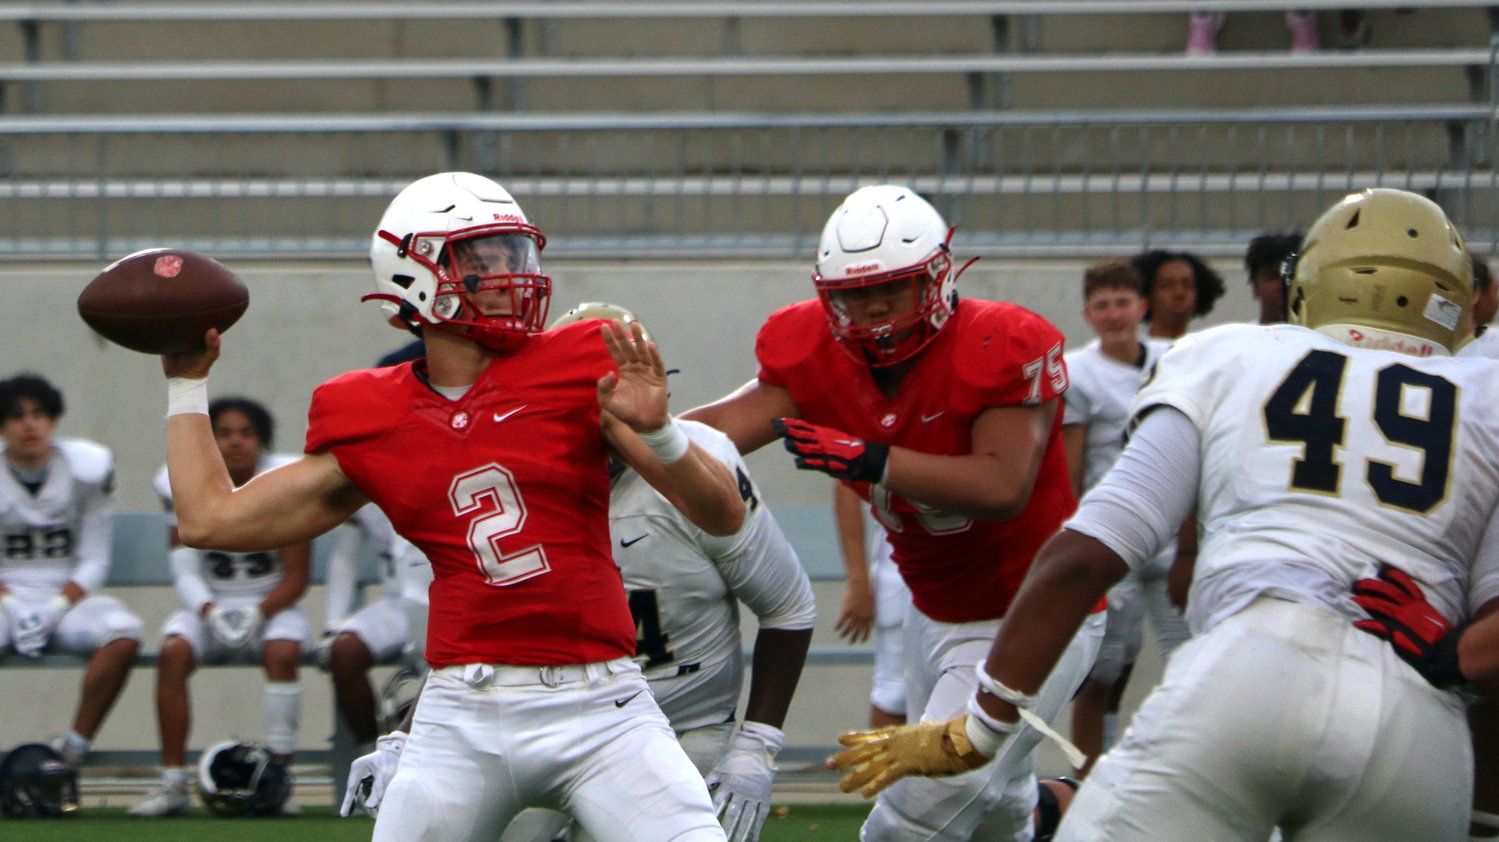 Katy’s Caleb Koger makes a pass during Katy’s scrimmage against Klein Collins on Friday at Legacy Stadium.